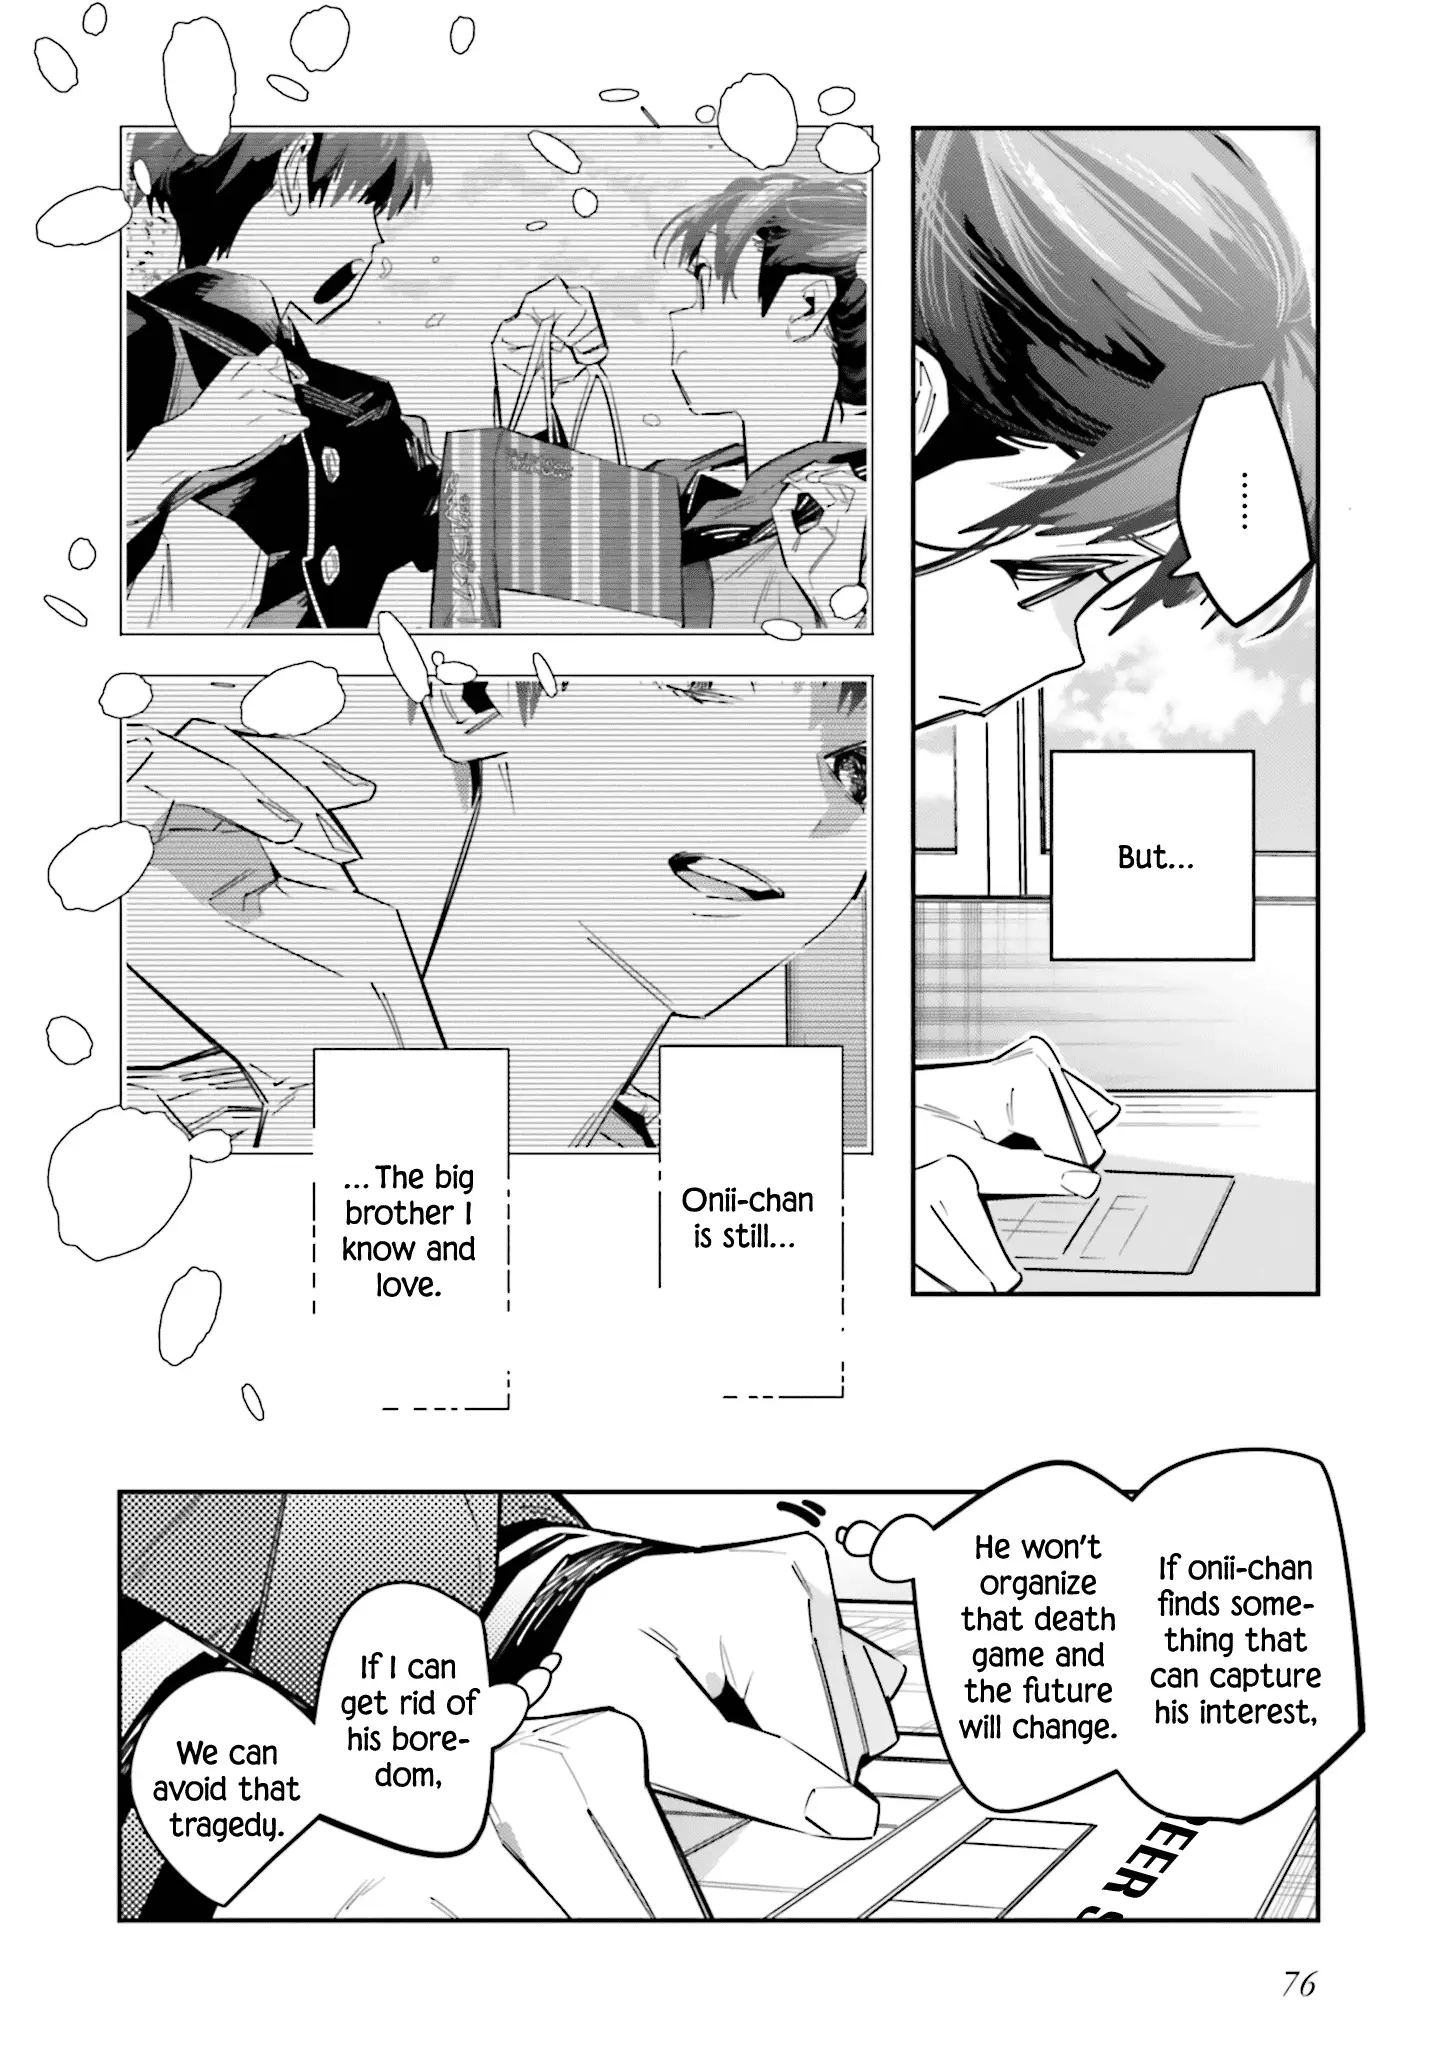 I Reincarnated As The Little Sister Of A Death Game Manga's Murder Mastermind And Failed - 7 page 6-31bcff30